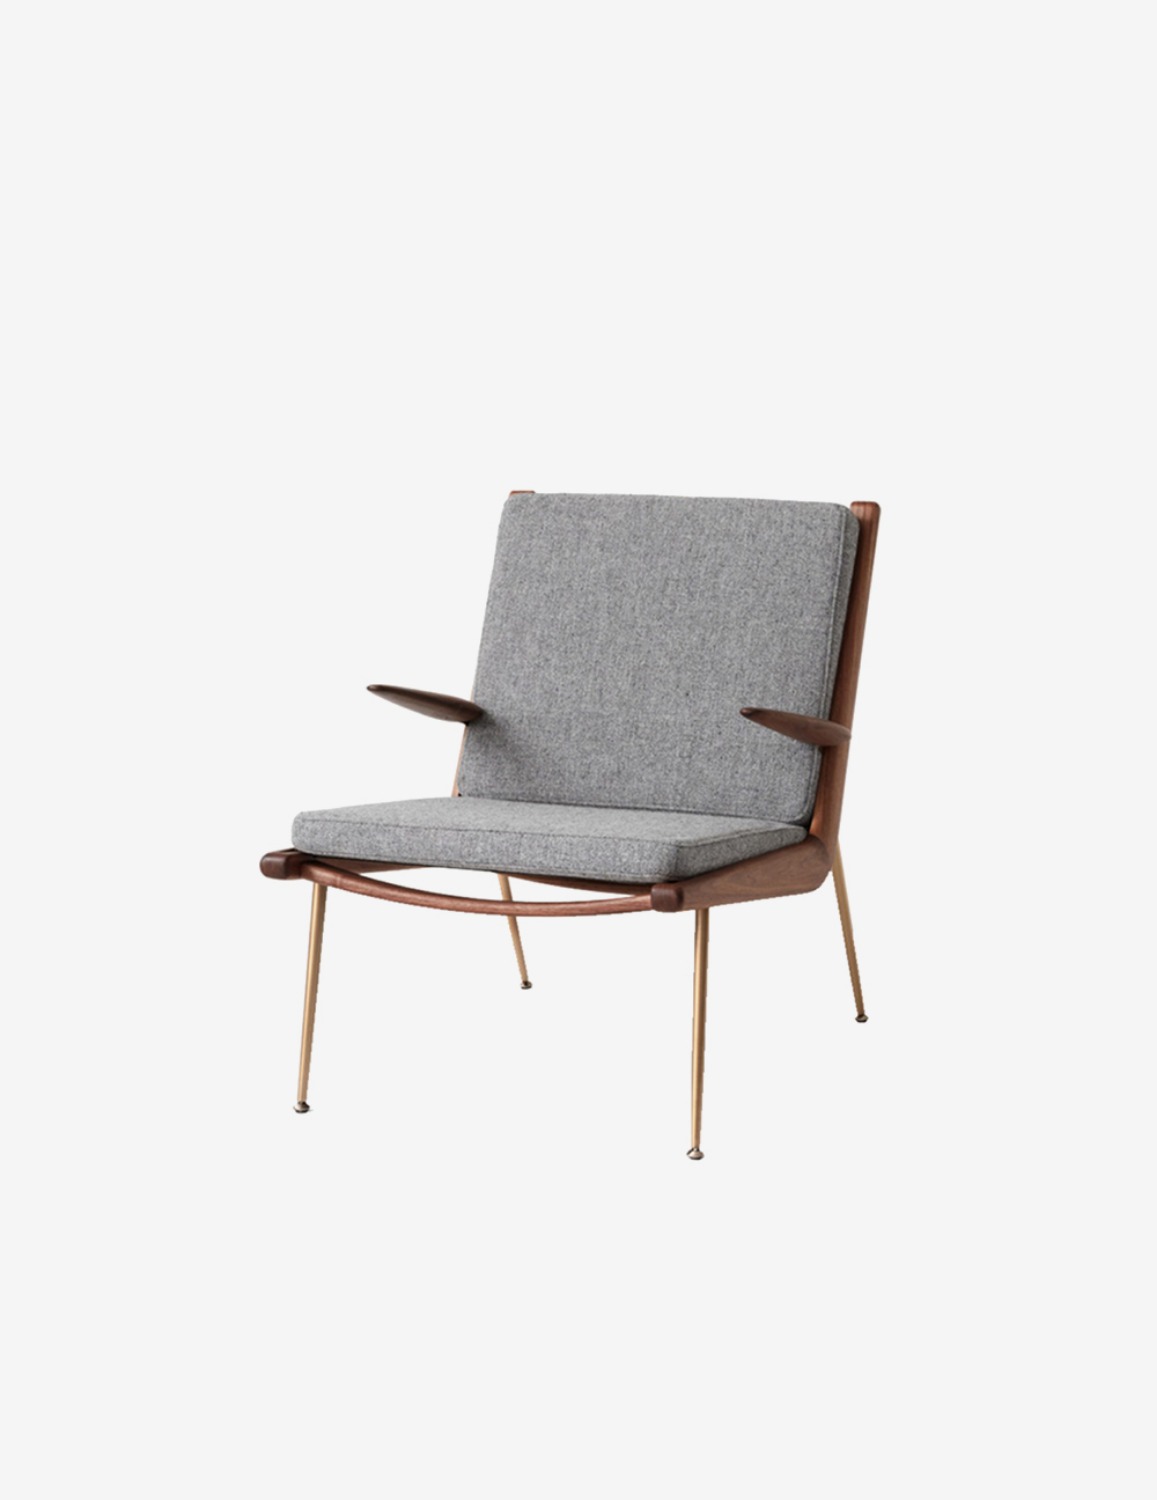 [Andtradition] Boomerang lounge chair / HM2